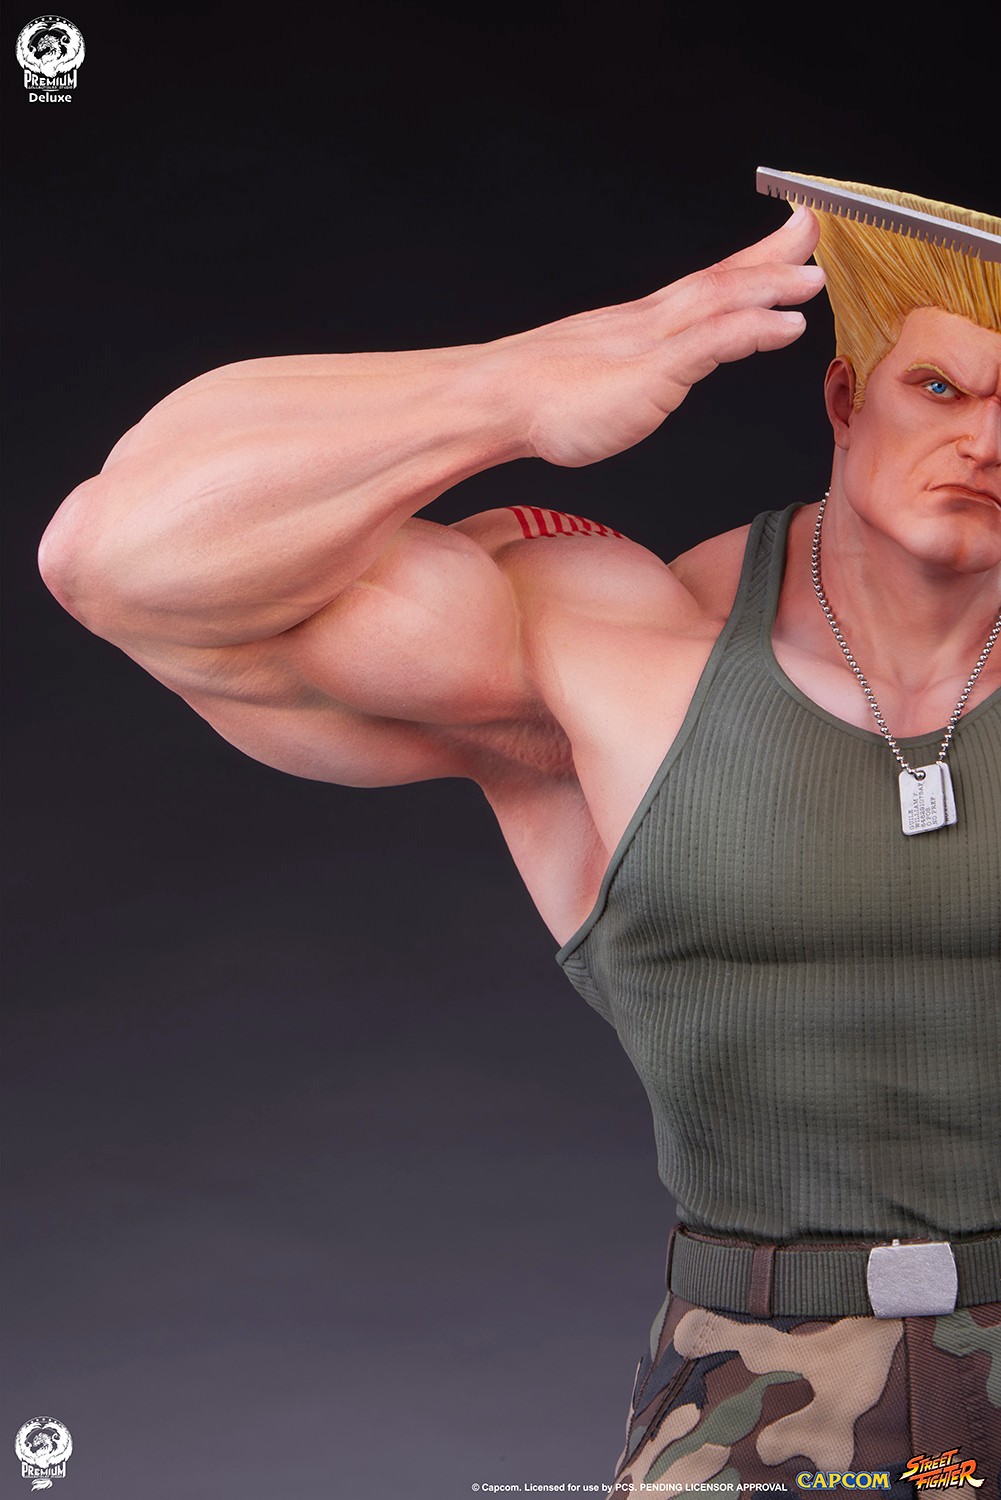 Guile Deluxe Edition (Prototype Shown) View 16